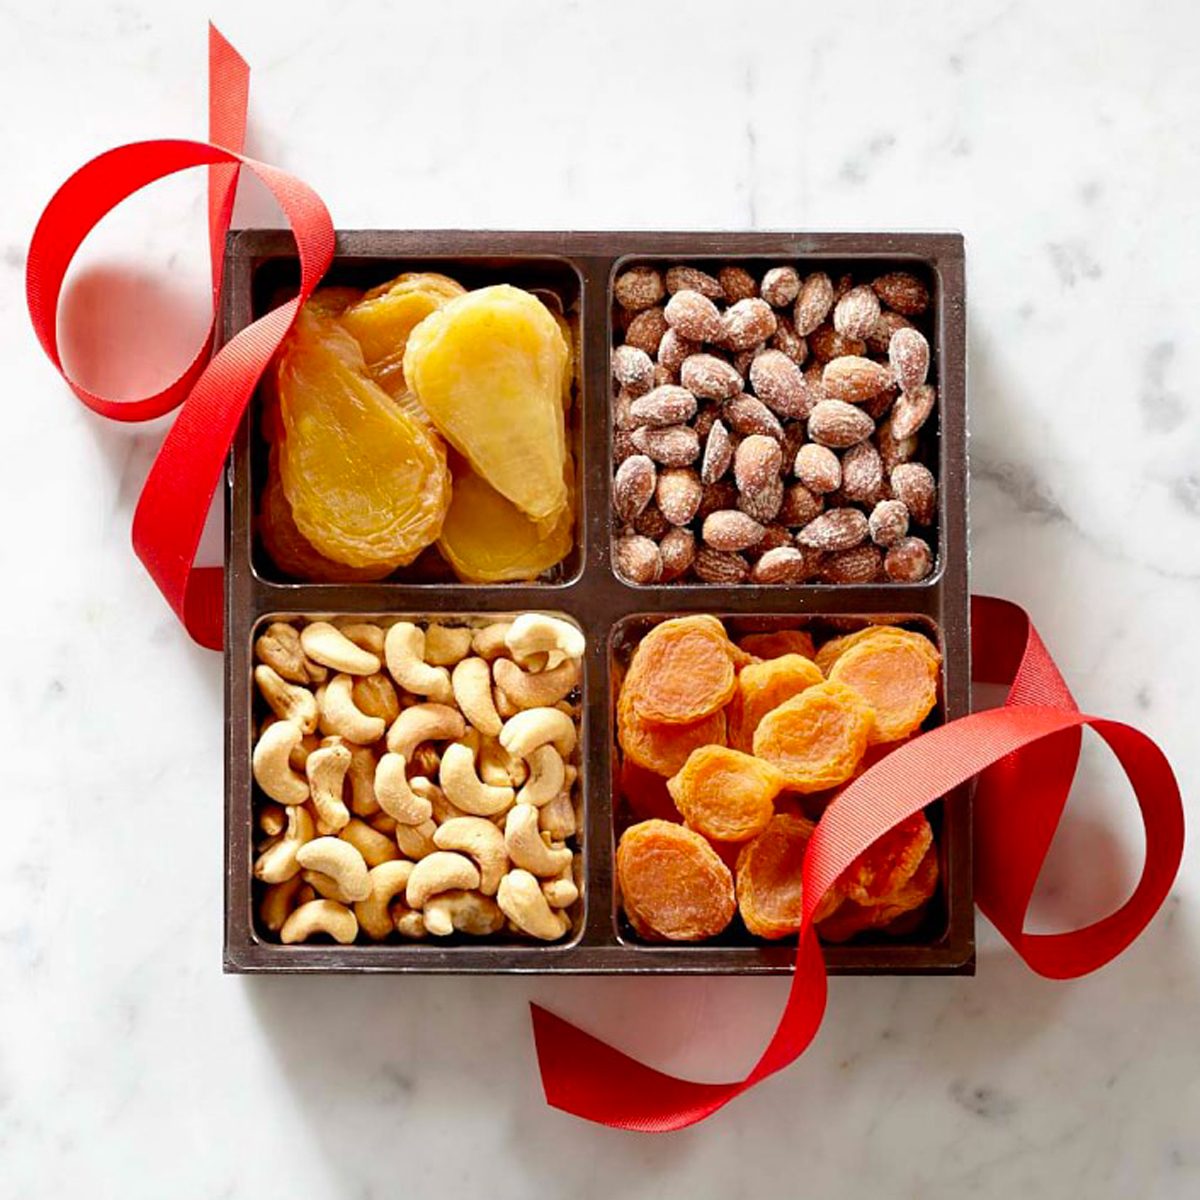 Dried Fruit And Nut Gift Box Ecomm Williams Sonoma.com